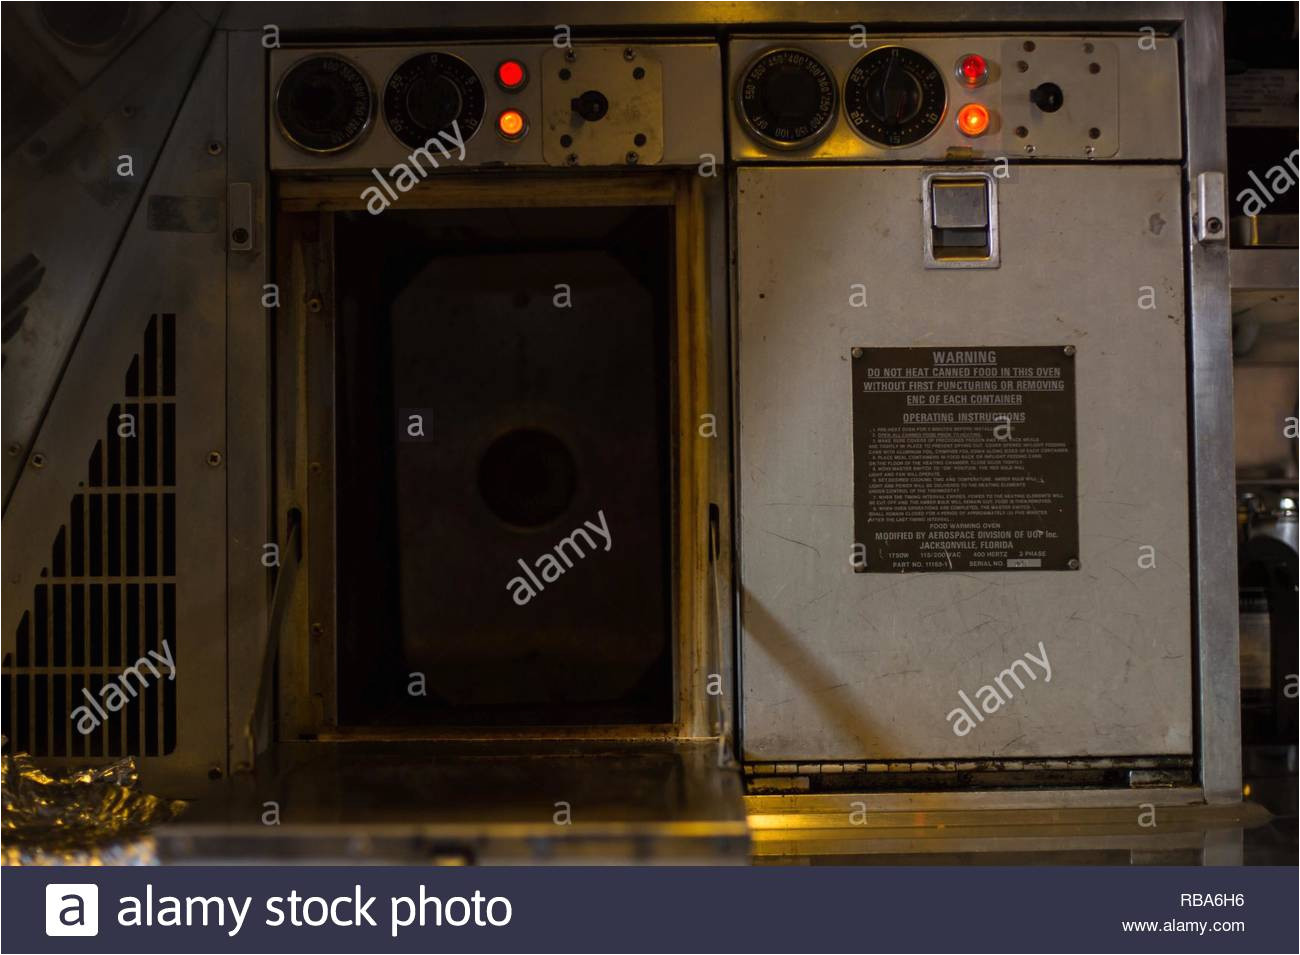 a kc 10 extender oven is heated for a holiday meal during a sortie supporting